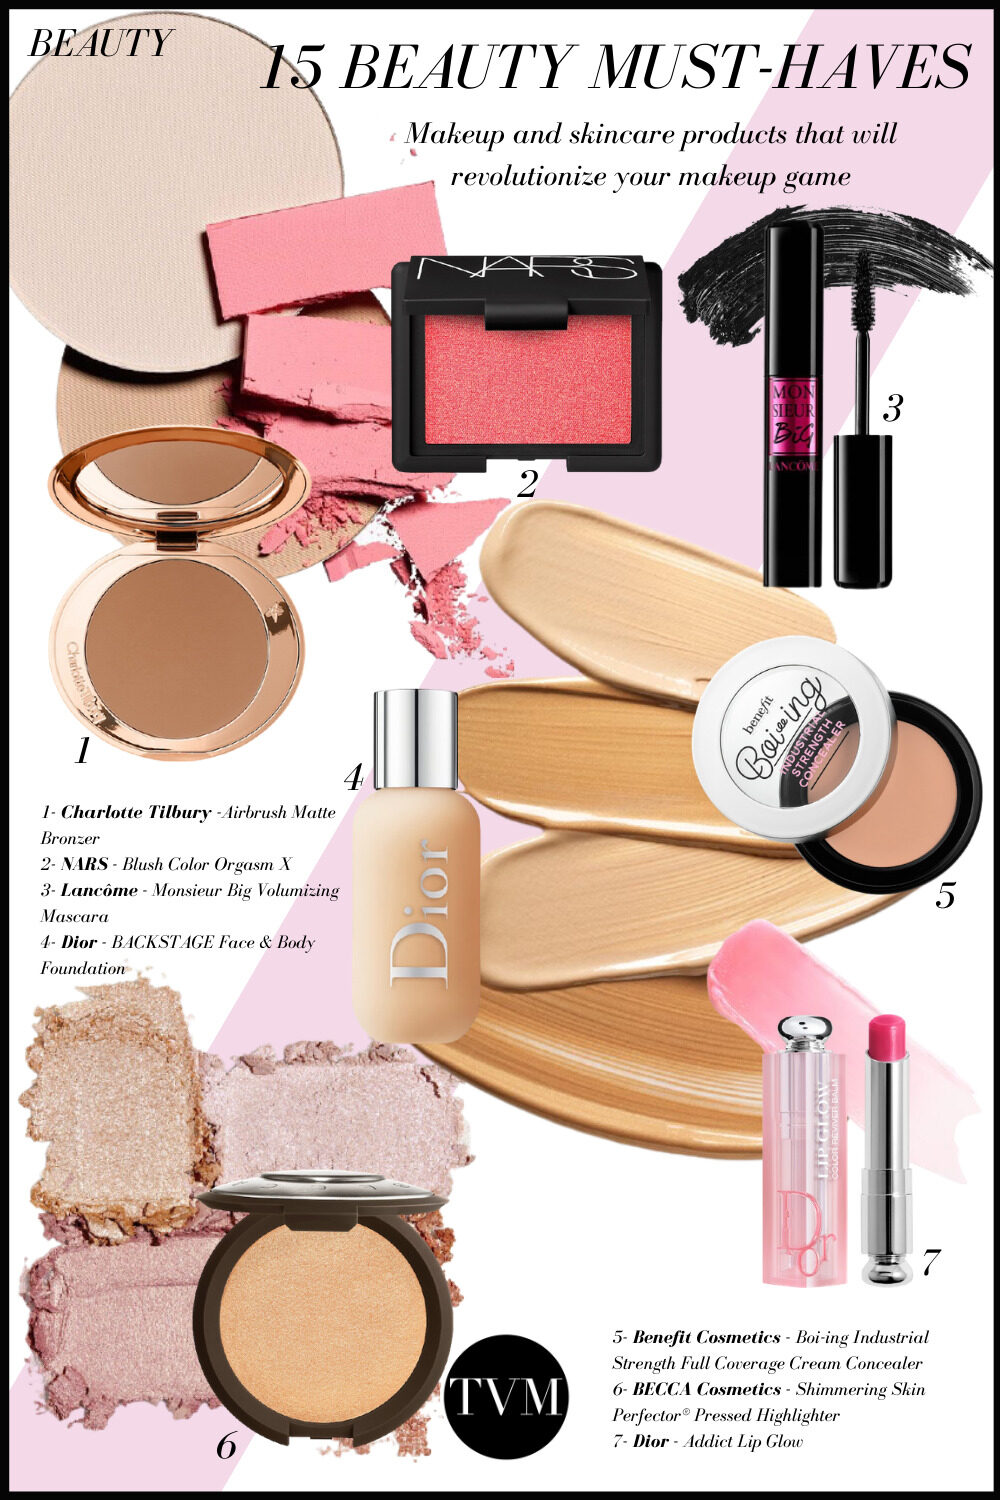 15 BEAUTY MUST-HAVES YOU NEED! - THE VANITY